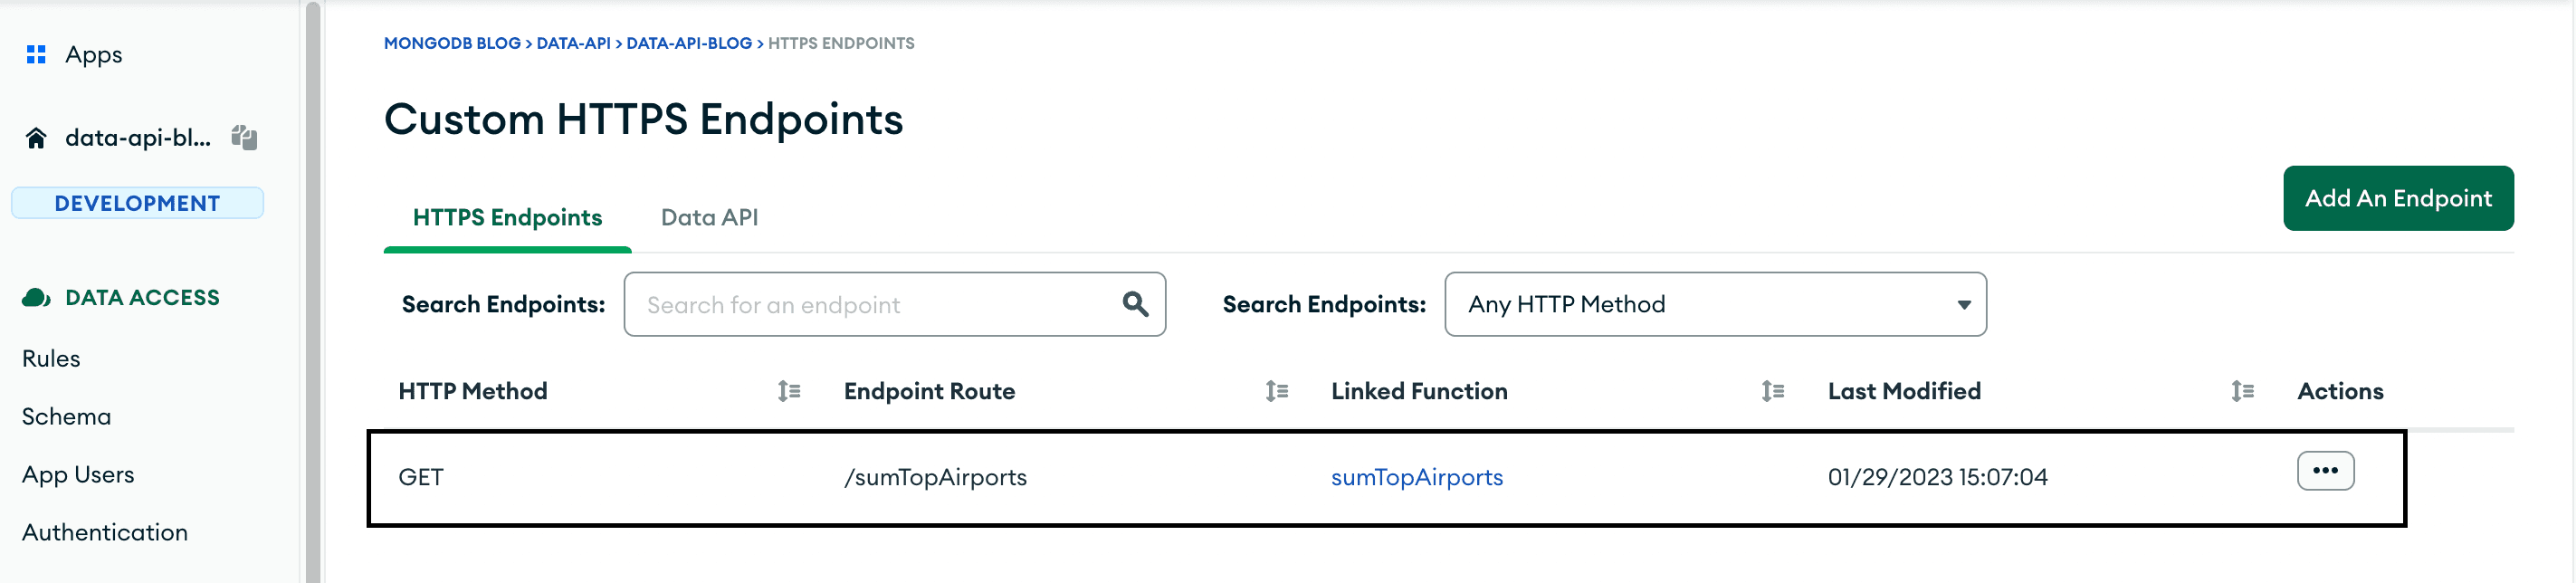 custom HTTPS endpoint is now visible in the Atlas UI